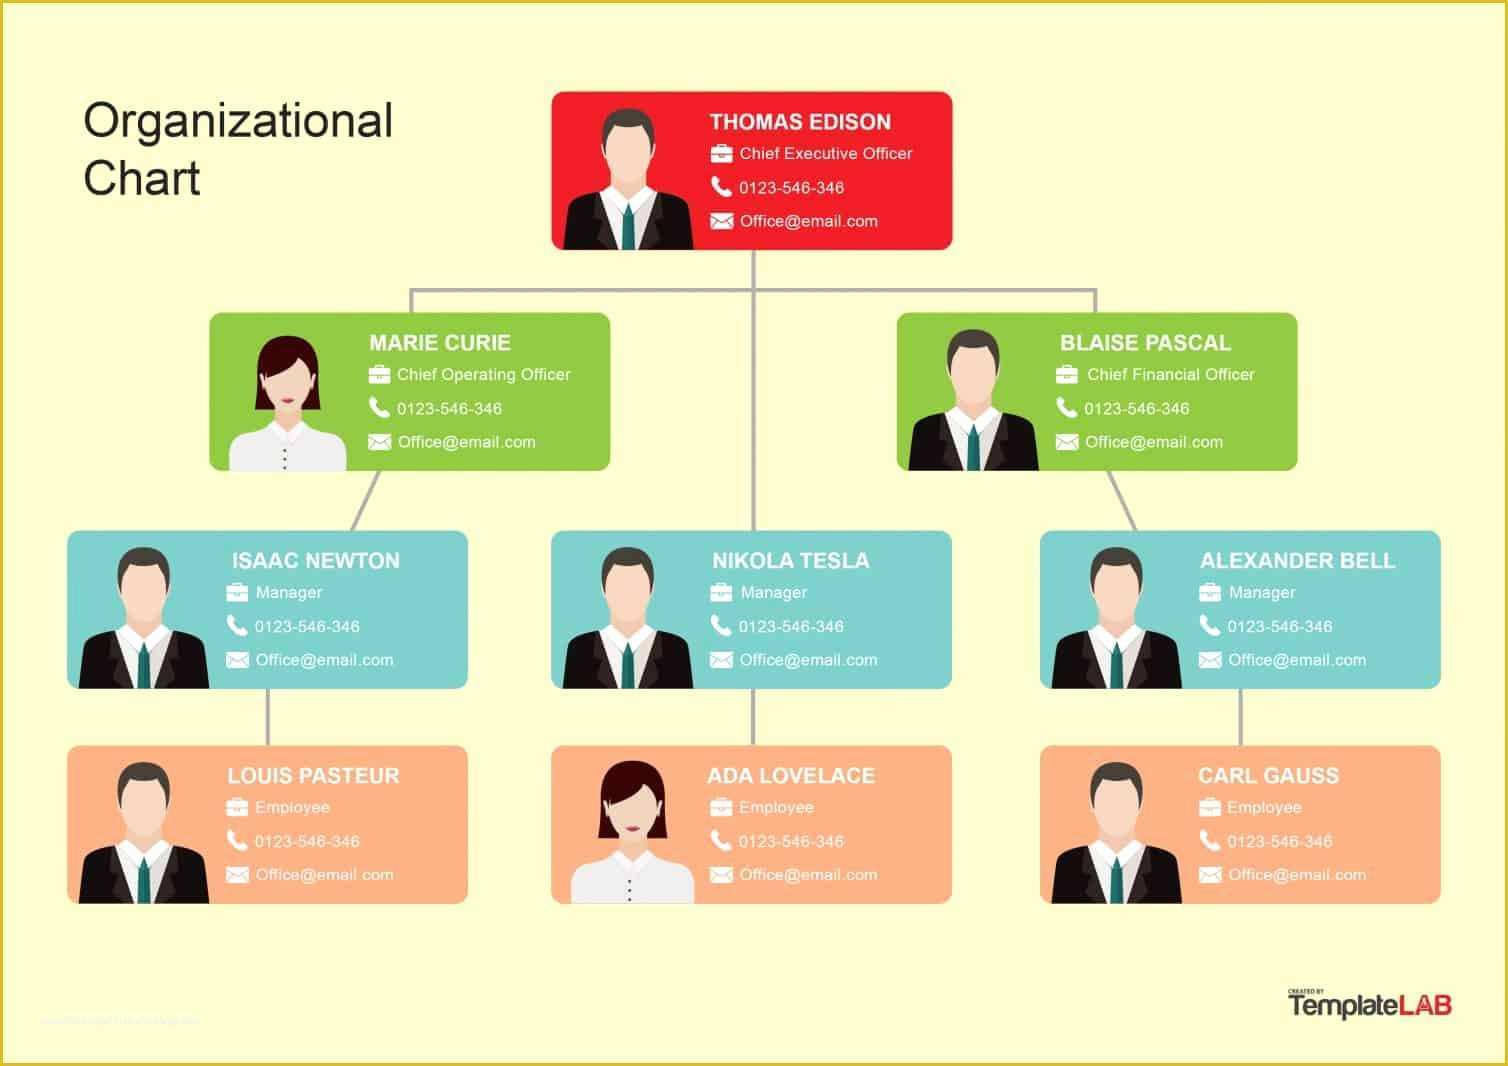 Corporate Structure Template Free Of 40 organizational Chart Templates Word Excel Powerpoint